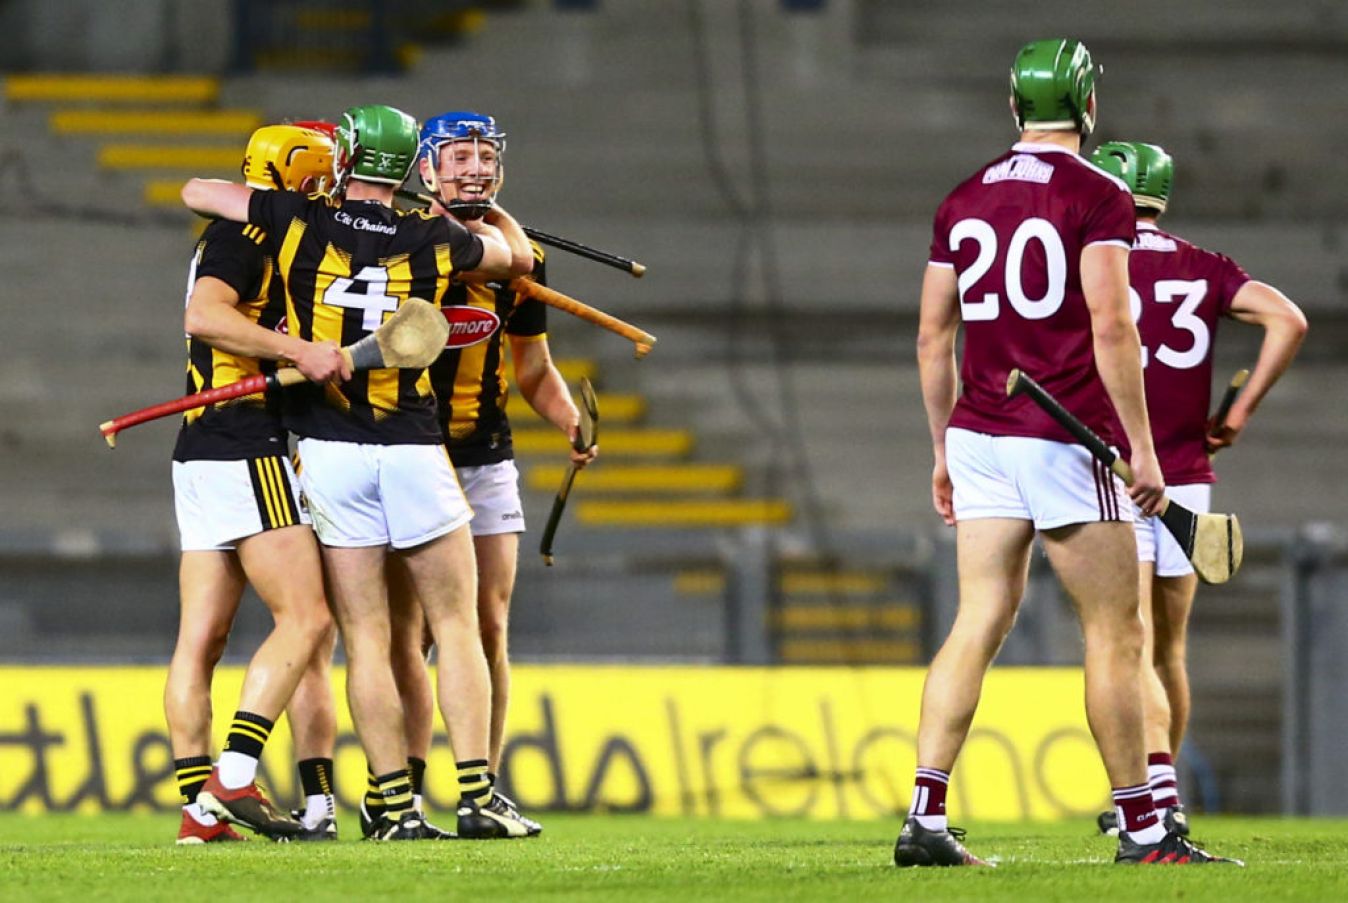 Kilkenny Players Celebrate Their Win. Credit ©Inpho/Ken Sutton